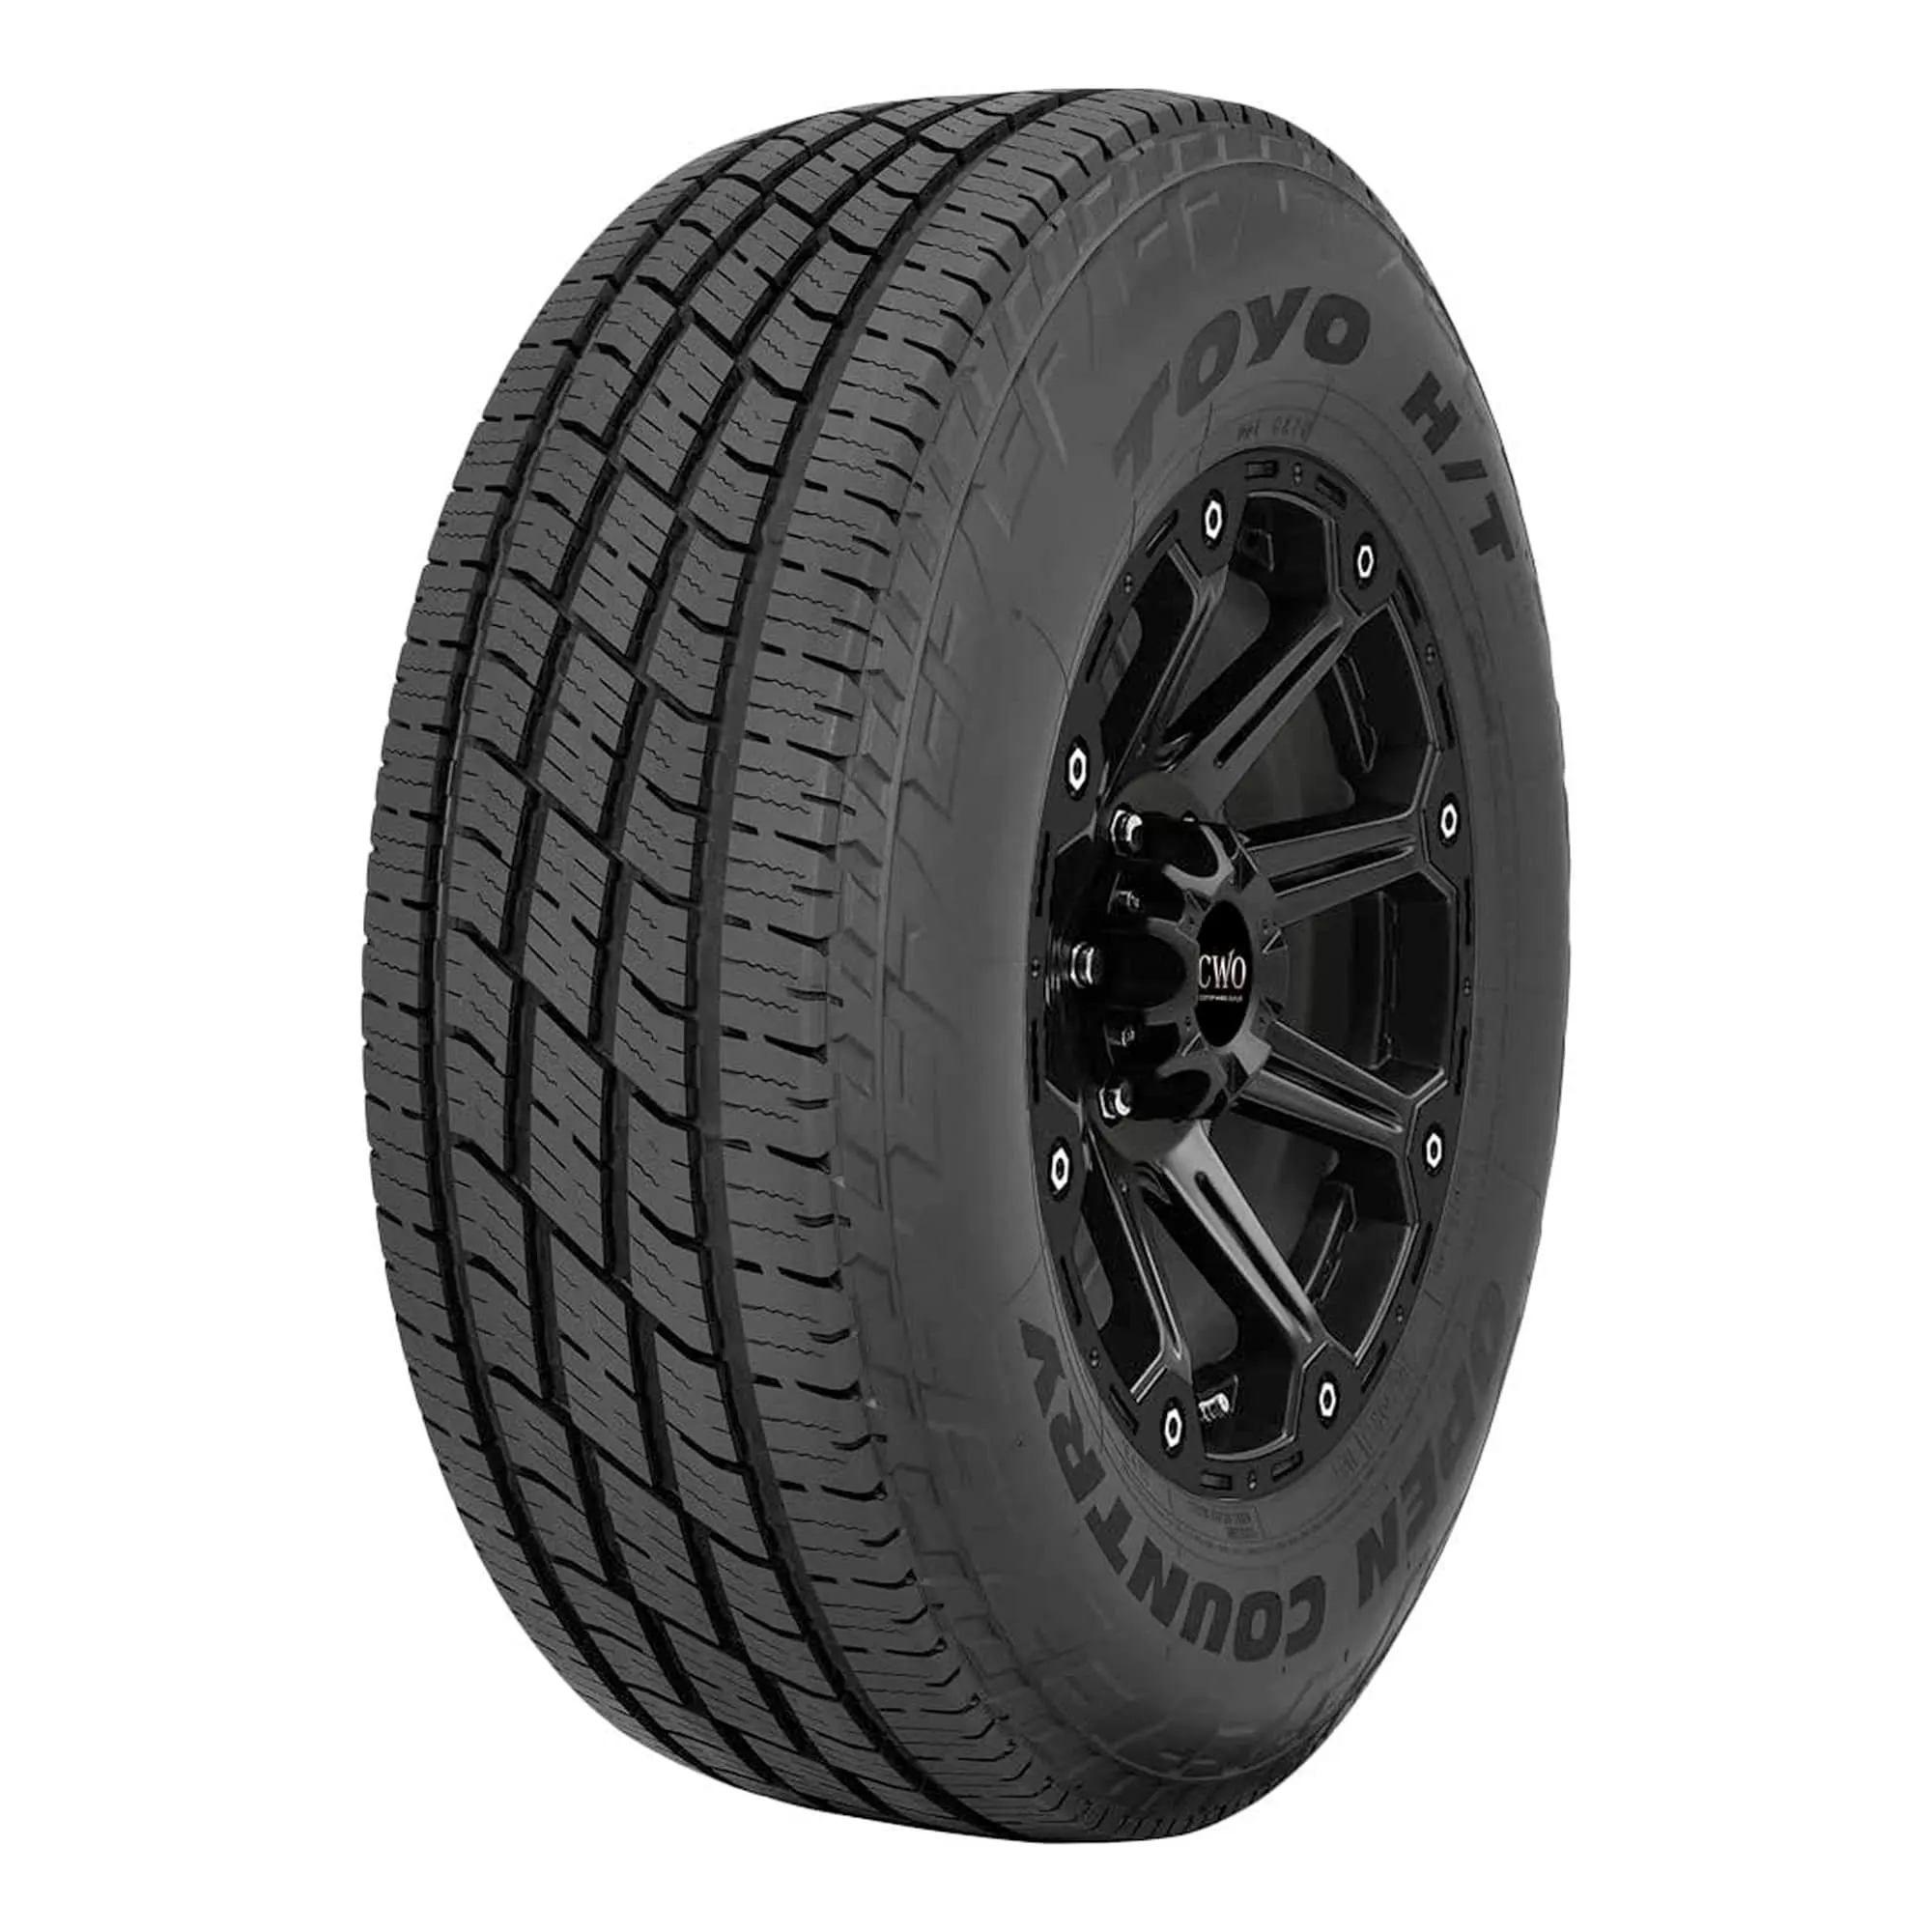 Шина 265/50R20 111V Open Country H/T XL